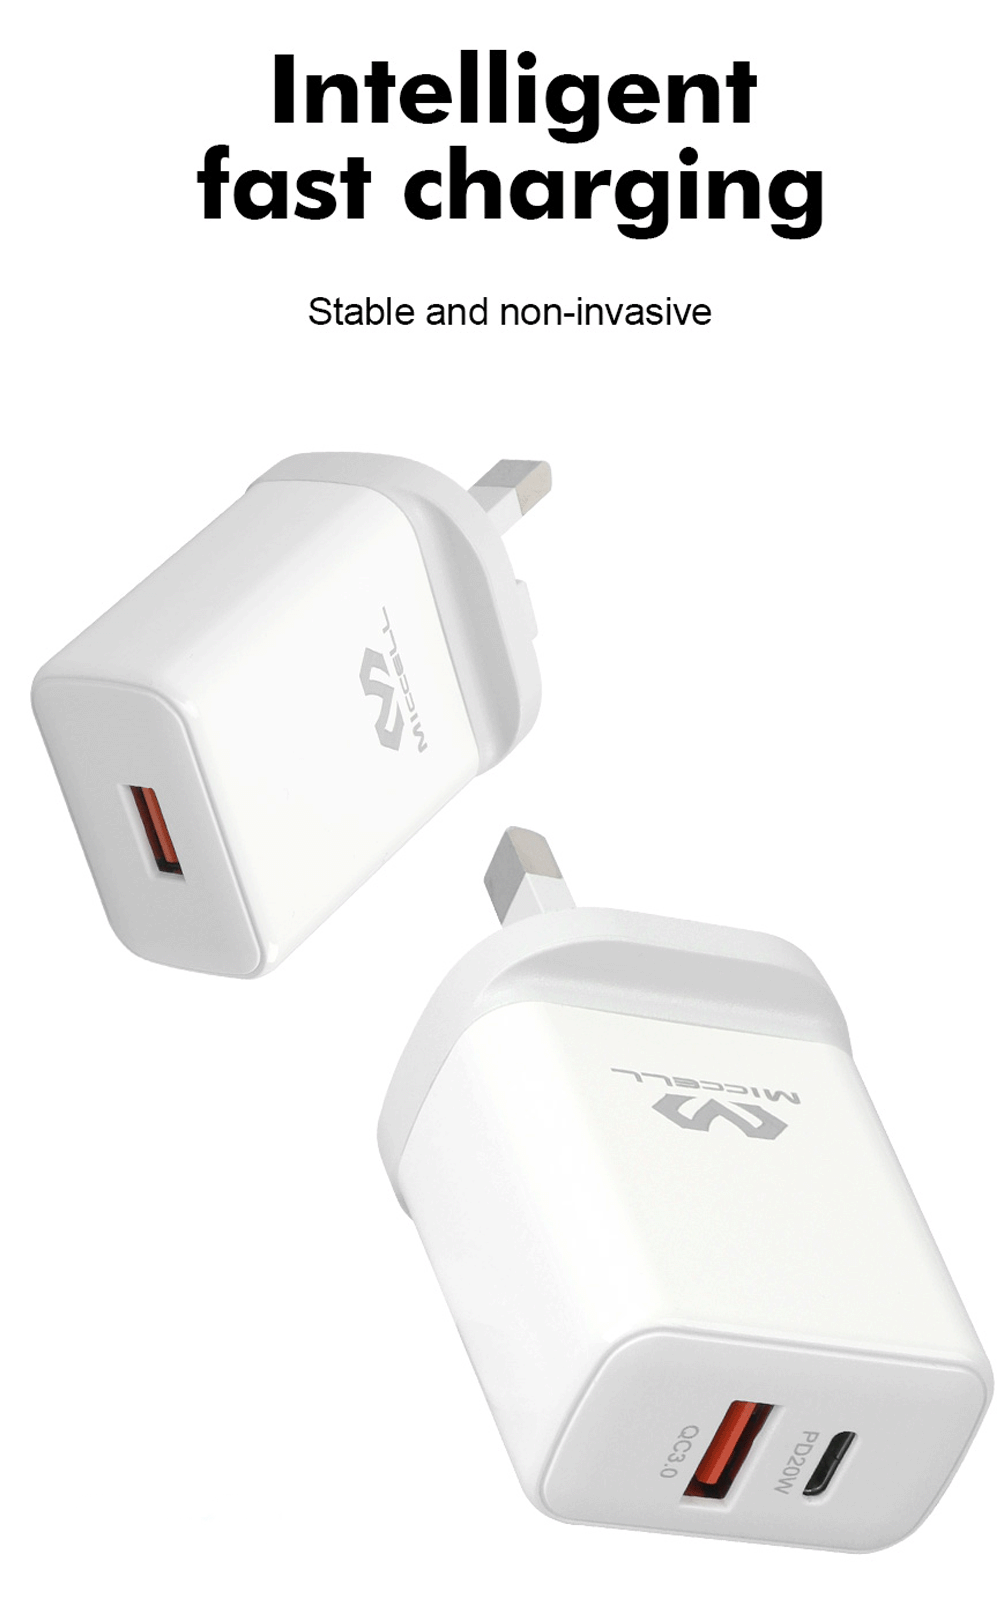 power adapter | 20w usb c power adapter | usb c power adapter | fast charger